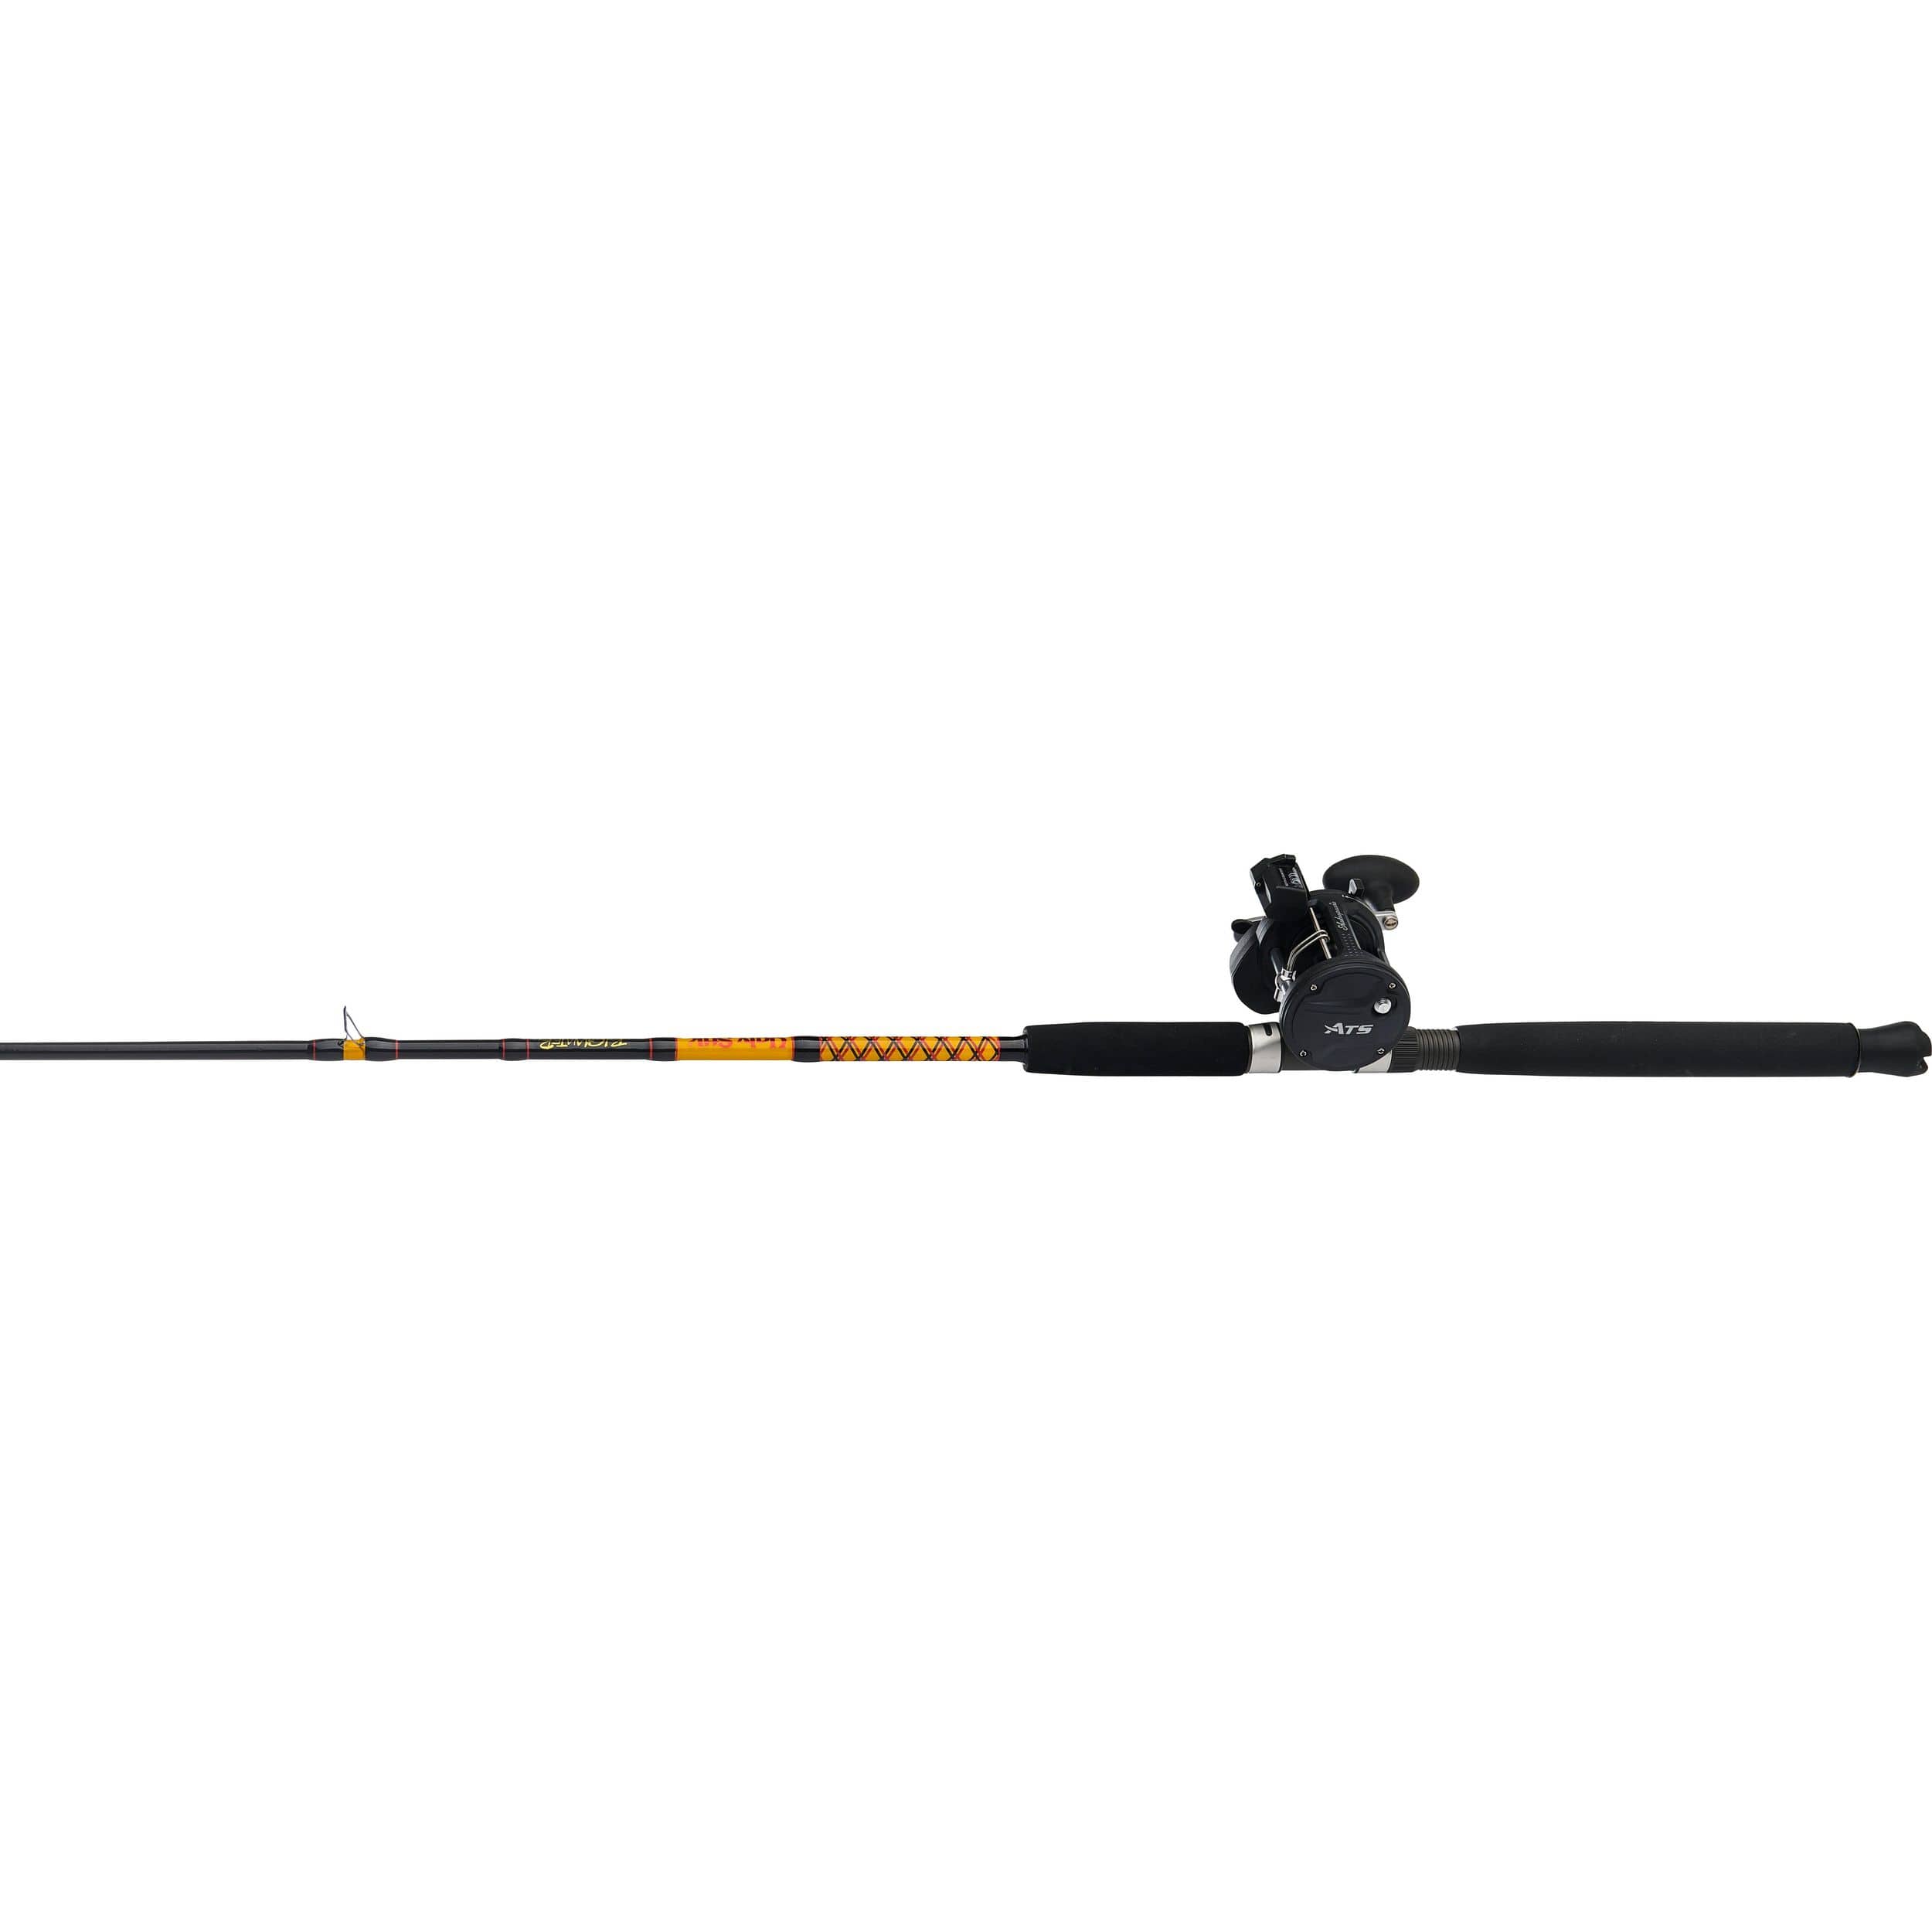 Scotty Downrigger Reviews - Electric Propack 1116 trolling salmon fishing